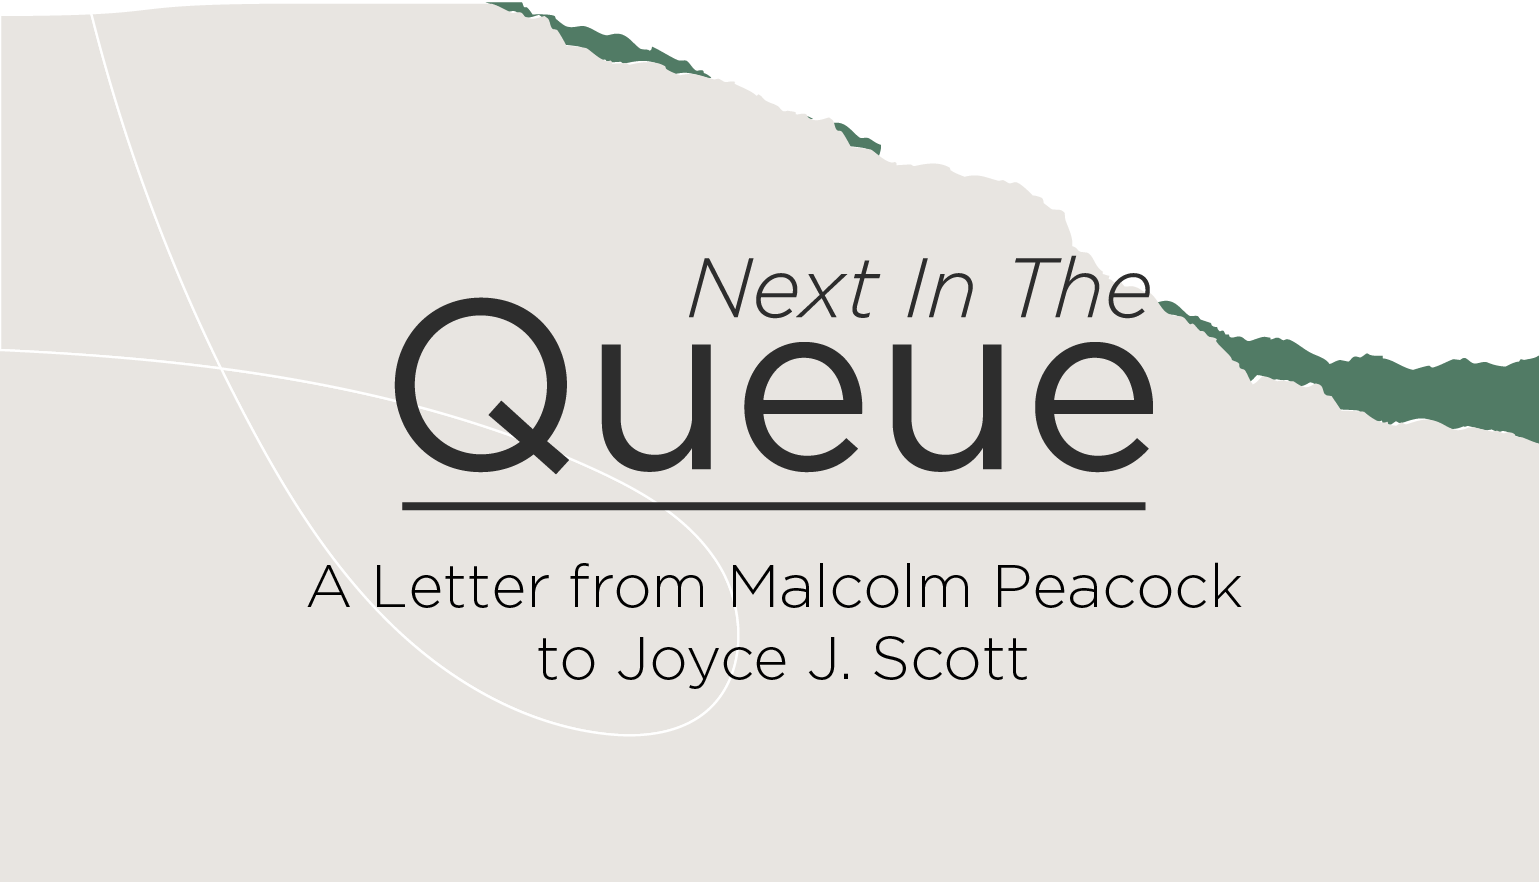 blog post cover graphic for The Queue featuring Malcolm Peacock and Joyce J Scott